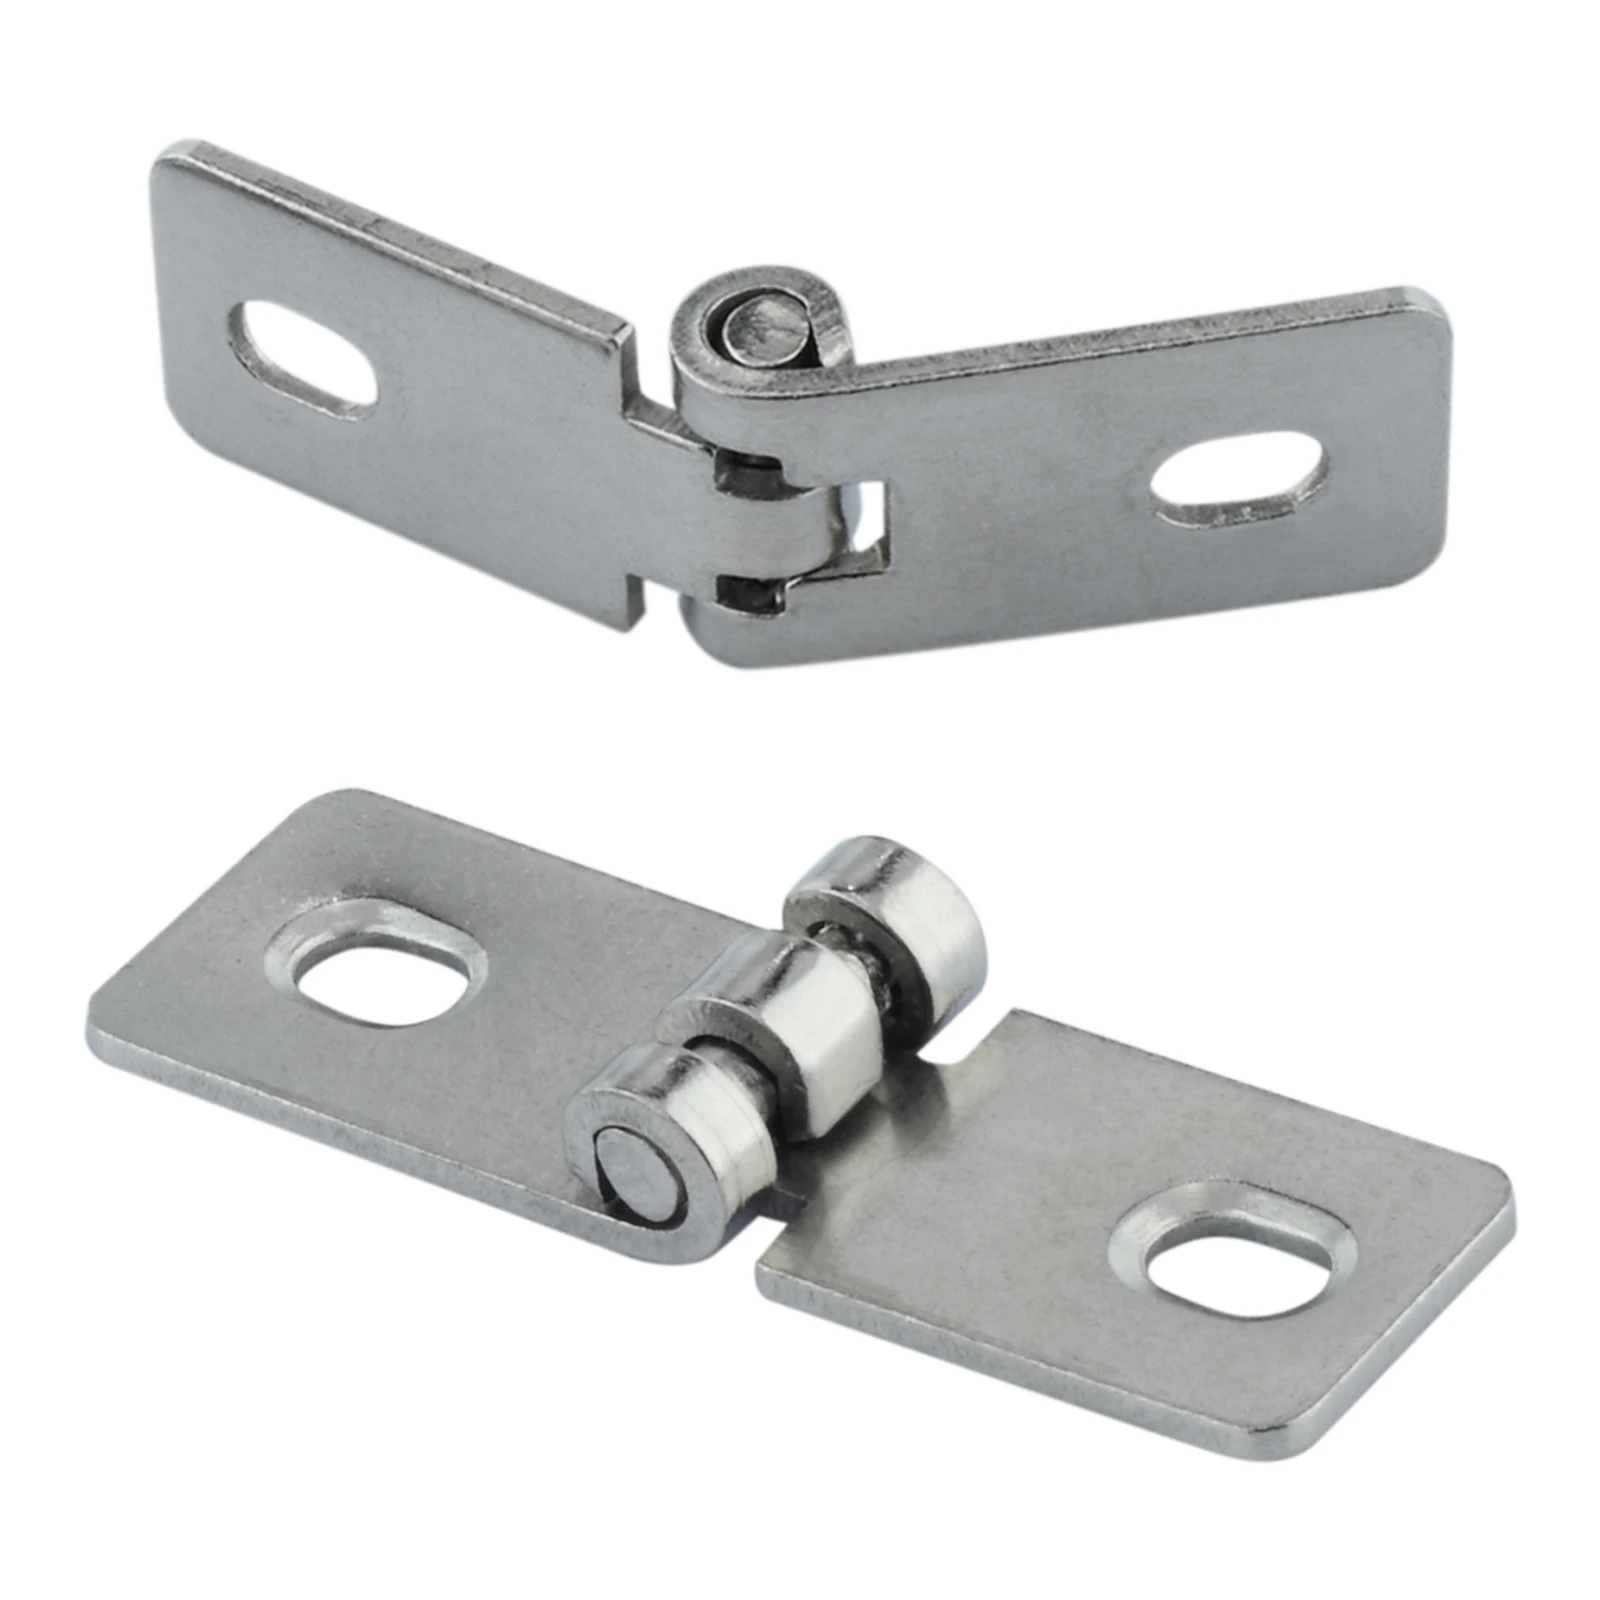 2Pcs Stainless Steel Nothing Frame Hinge Fold Nothing Frame Balcony Window Decorative Hinges for Vintage Wooden Box with Screws